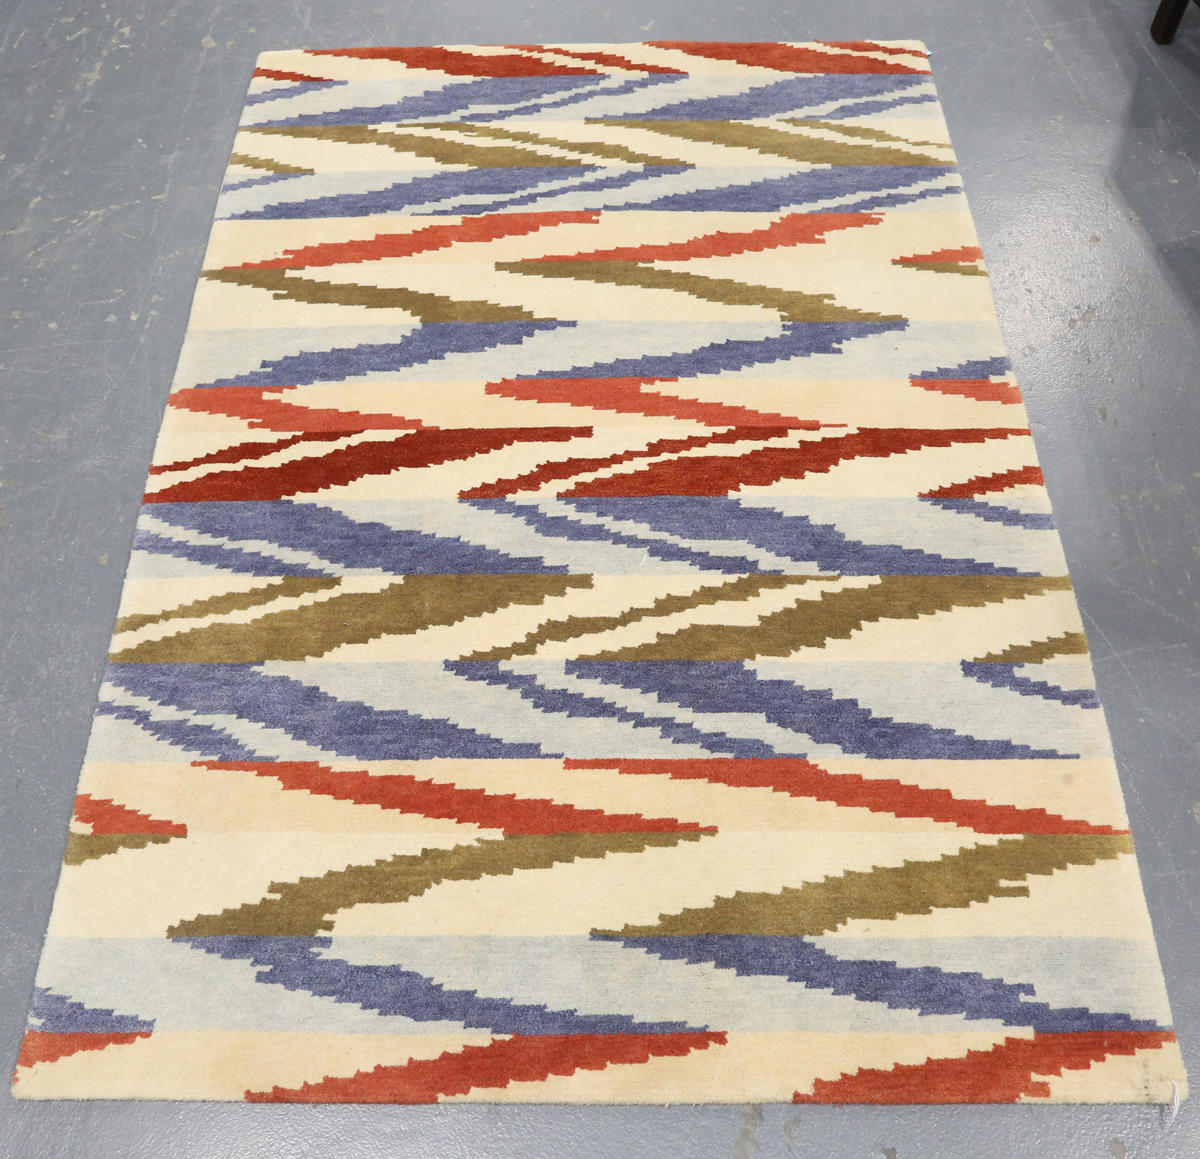 A contemporary design rug, modern, the ivory field with geometric polychrome bands, 180cm x 125cm.